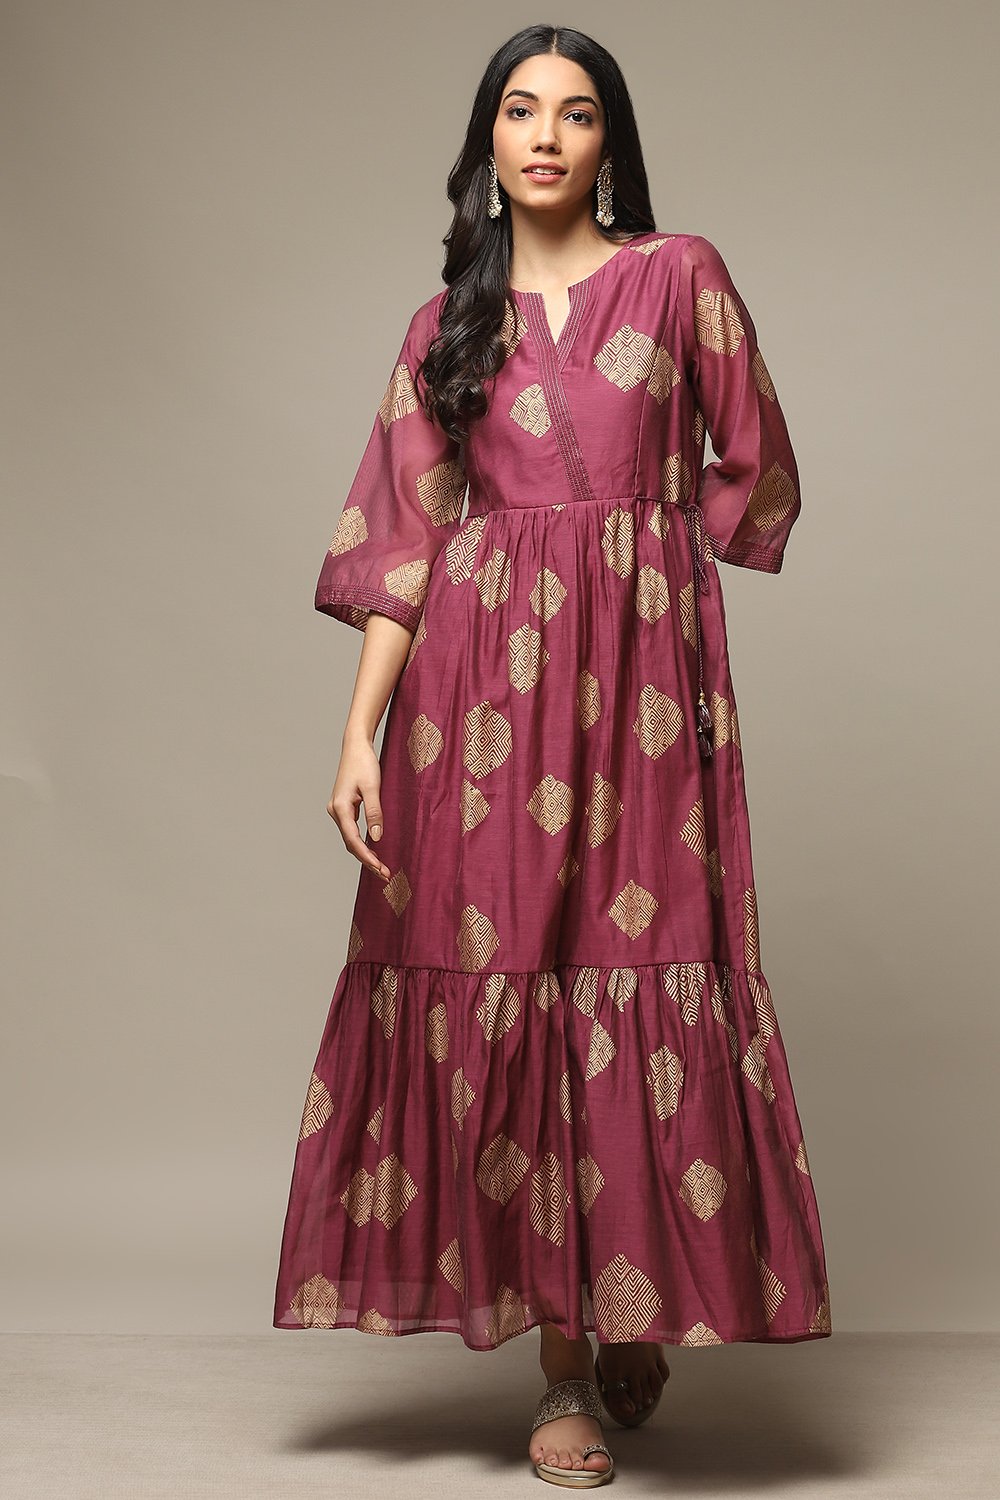 Buy Purple Cotton Blend Tiered Printed Dress for INR2399.40 |Biba India